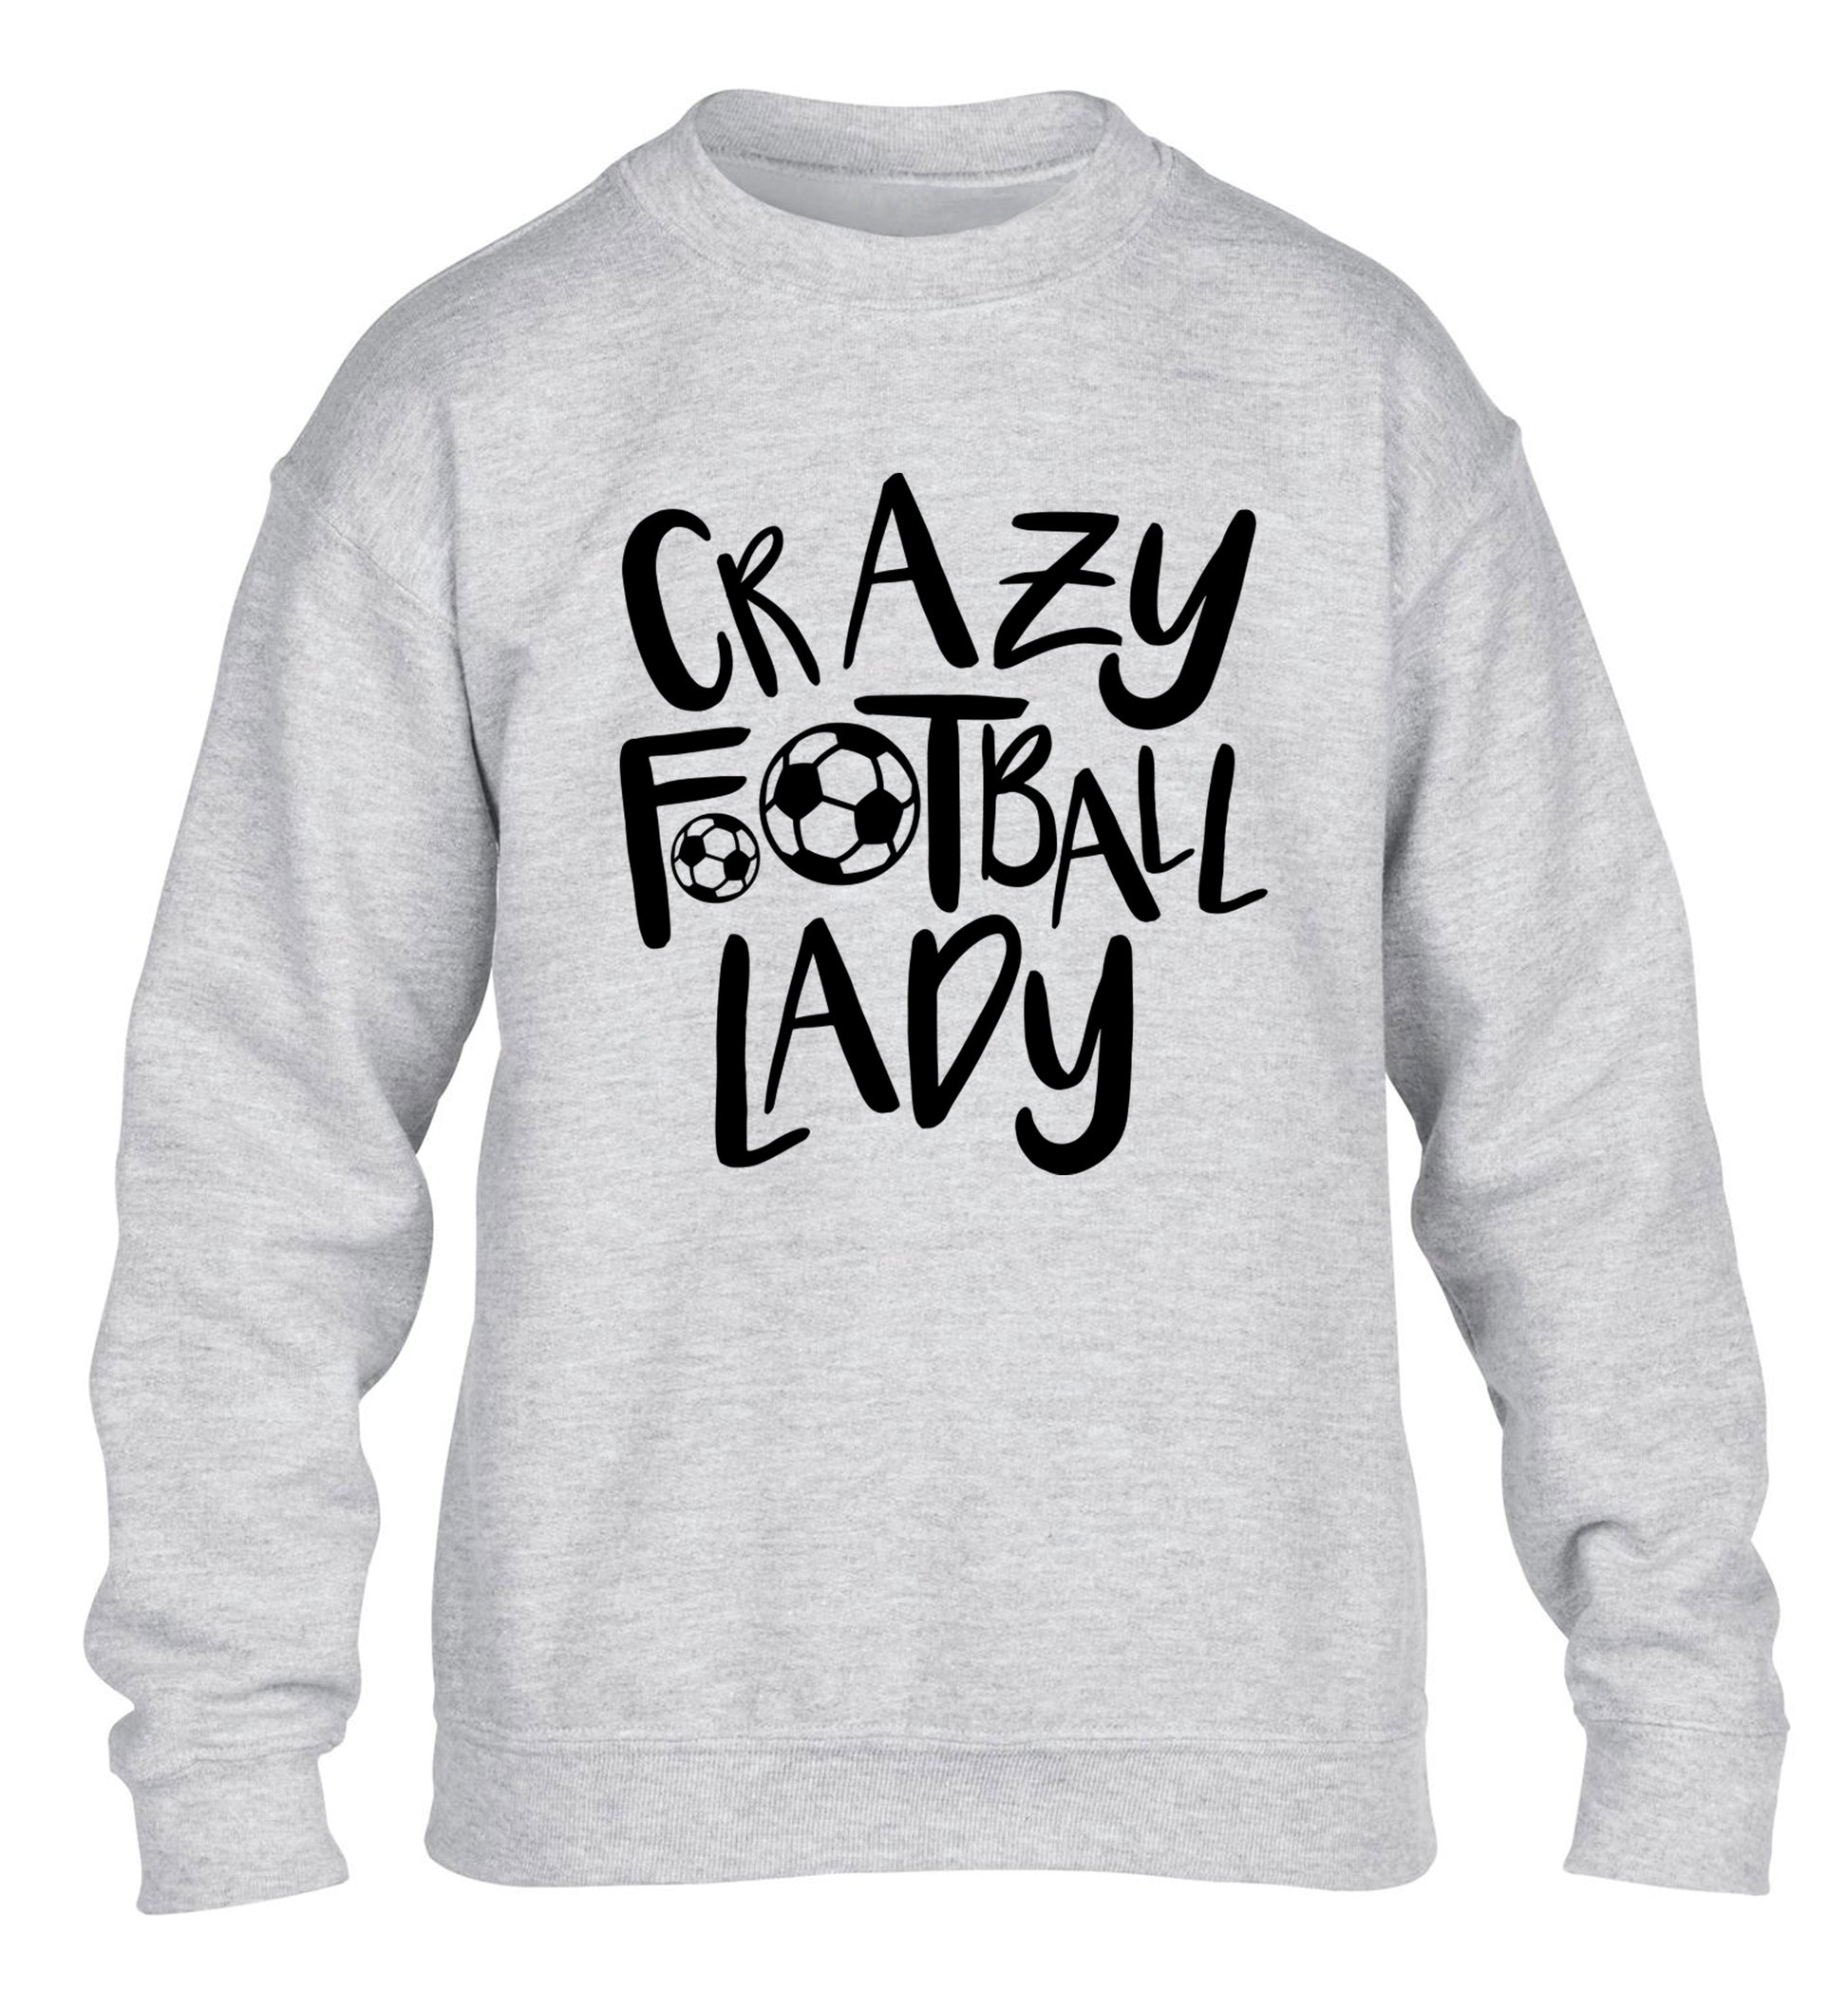 Crazy football lady children's grey sweater 12-14 Years